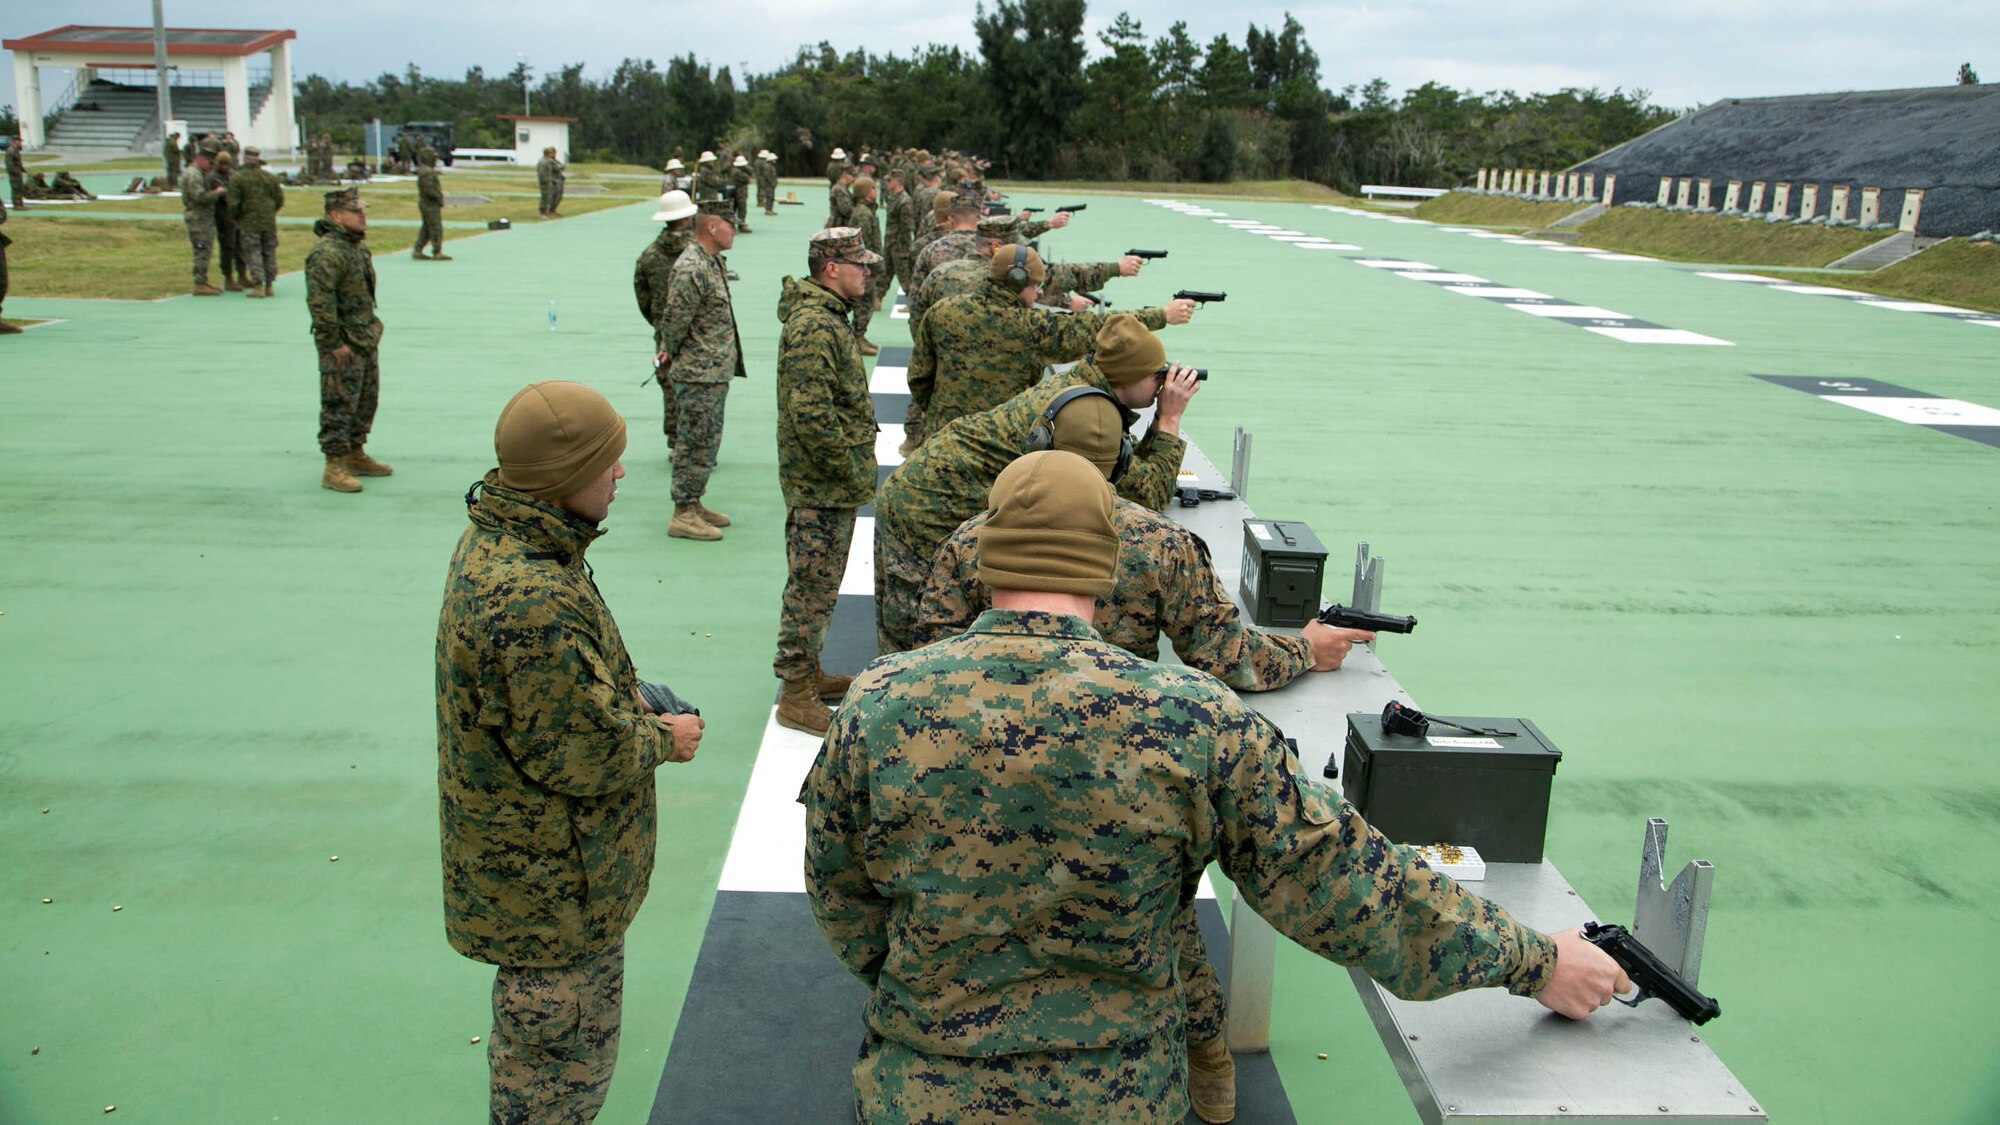 Shooters fire pistols during the Far East Division Marksmanship Match Dec. 17 aboard Camp Hansen, Okinawa, Japan. The competition consisted of classes, practice, and qualifications for both pistol and rifle marksmanship. Marine Aircraft Team 36 won the pistol marksmanship competition and 4th Marine Regiment won the rifle marksmanship competition.